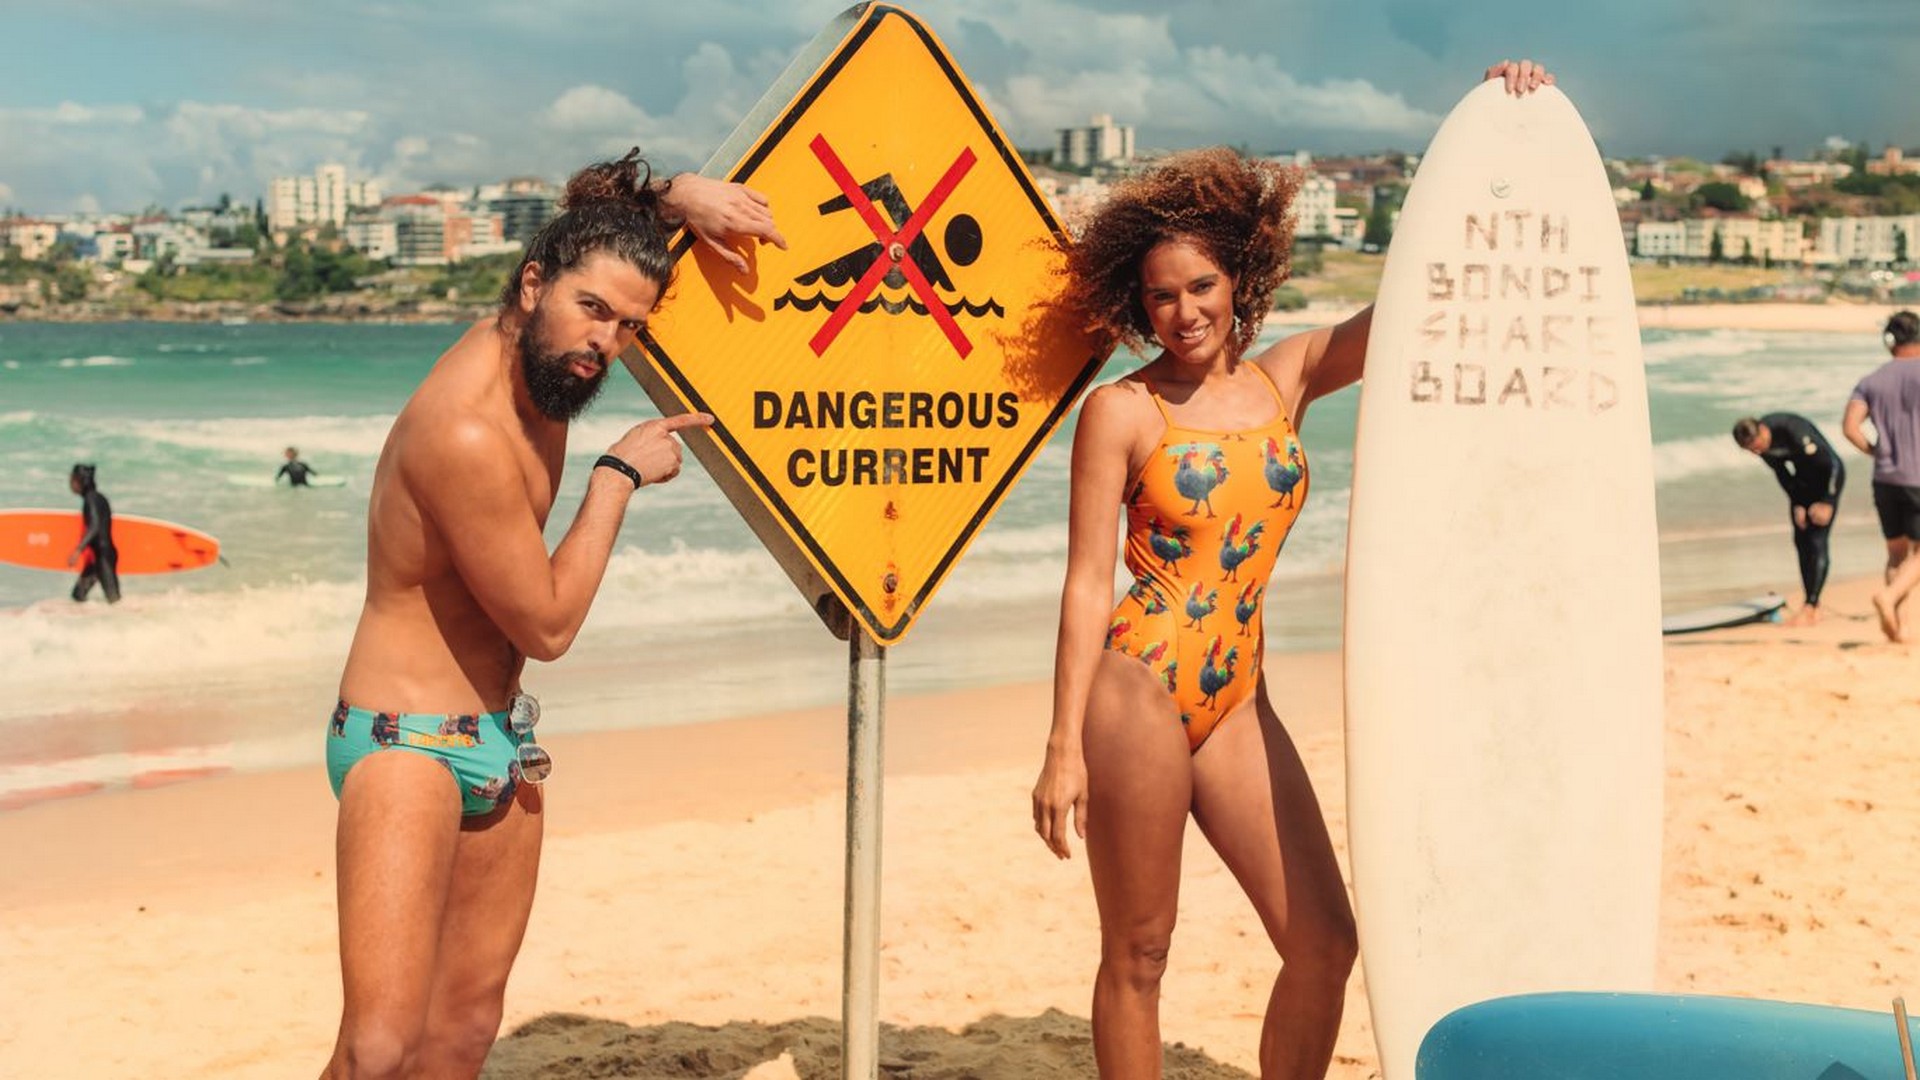 Dive Into Summer With The Far Cry 6 x Budgy Smuggler ‘Amigo’ Swimwear Collection